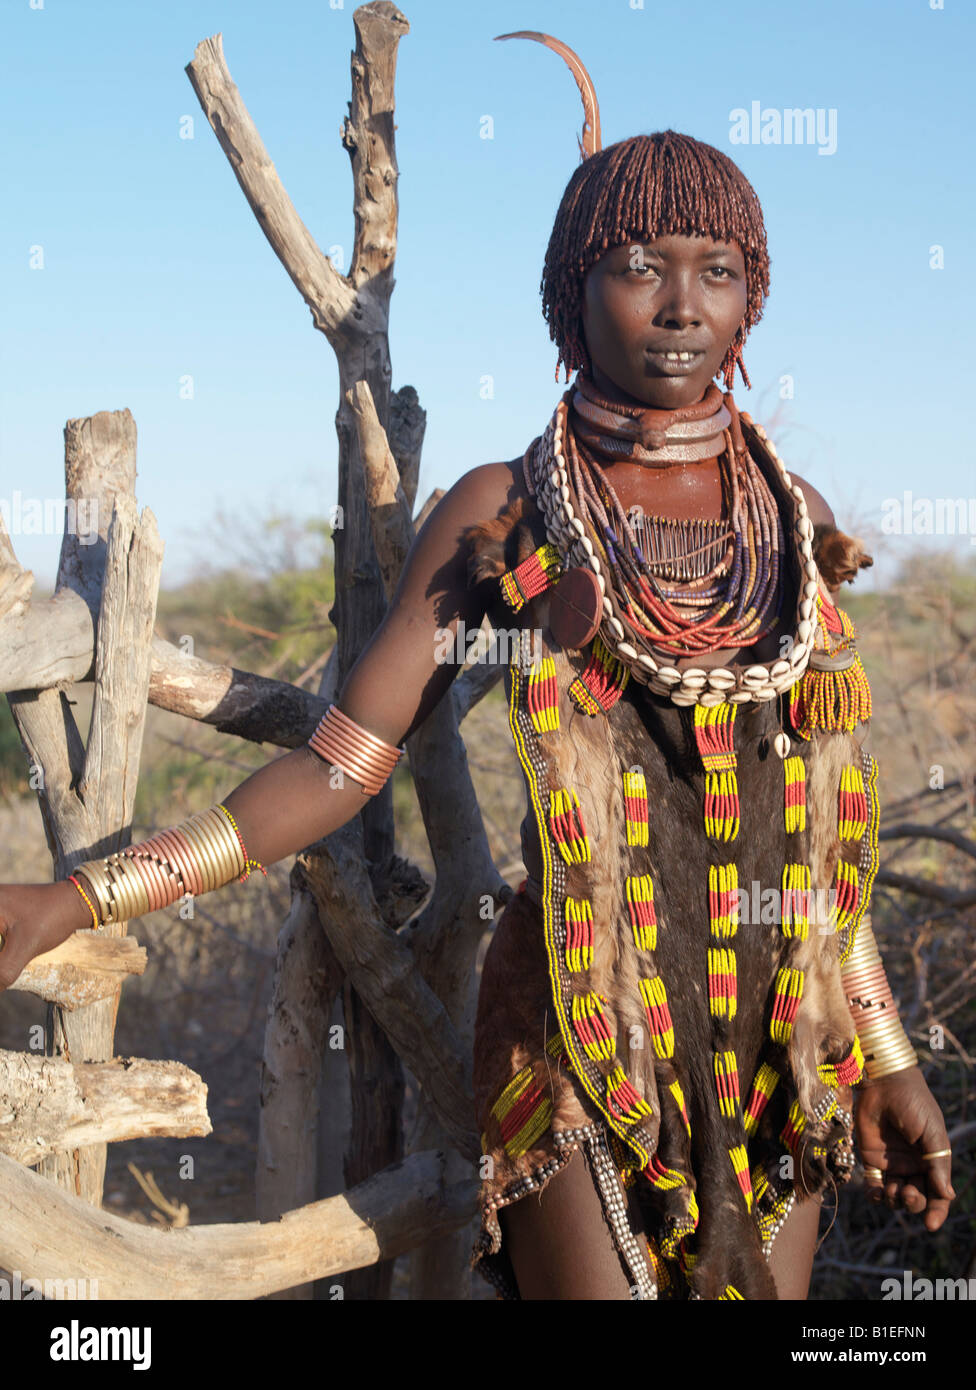 A Hamar woman at her homestead in the Hamar Mountains.The Hamar are semi-nomadic pastoralists of Southwest Ethiopia. Stock Photo